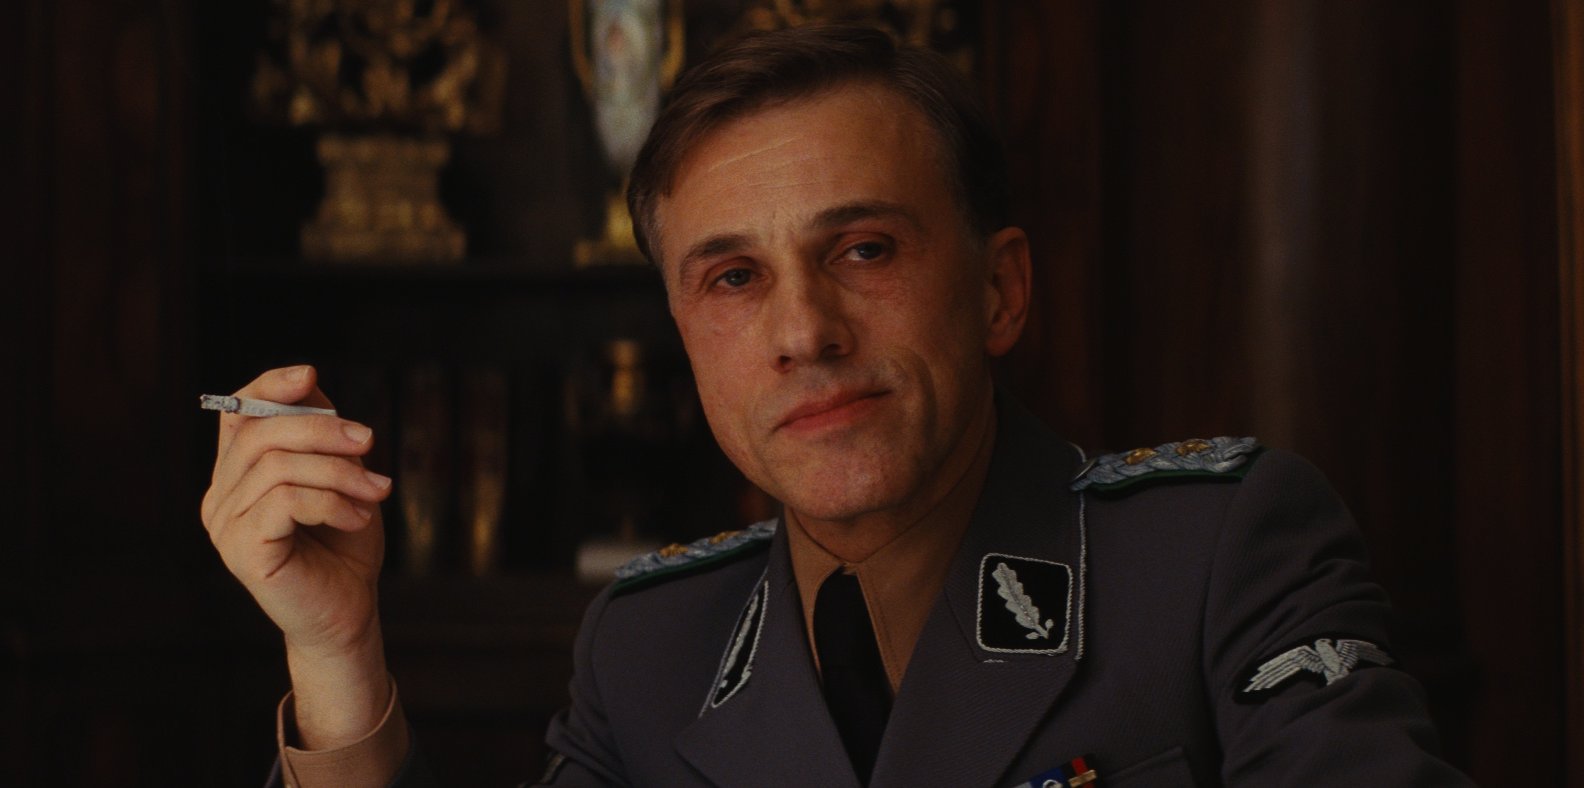 In Inglorious Basterds (2009) In the opening scene, when Col